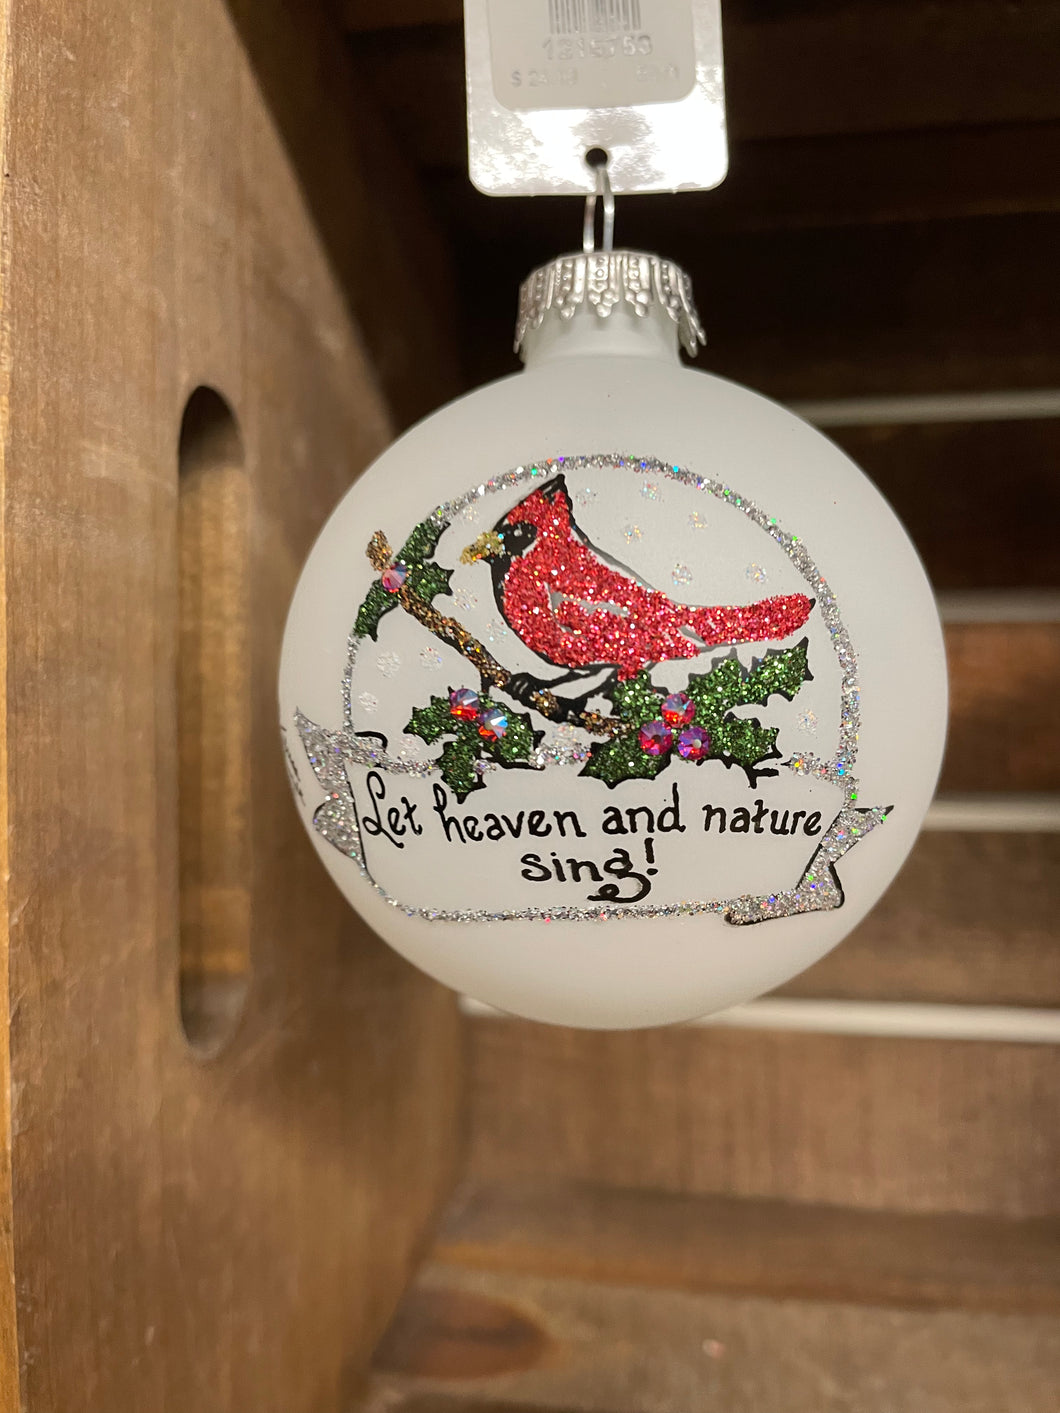 Bronner’s Heaven And Nature Sing Ornament